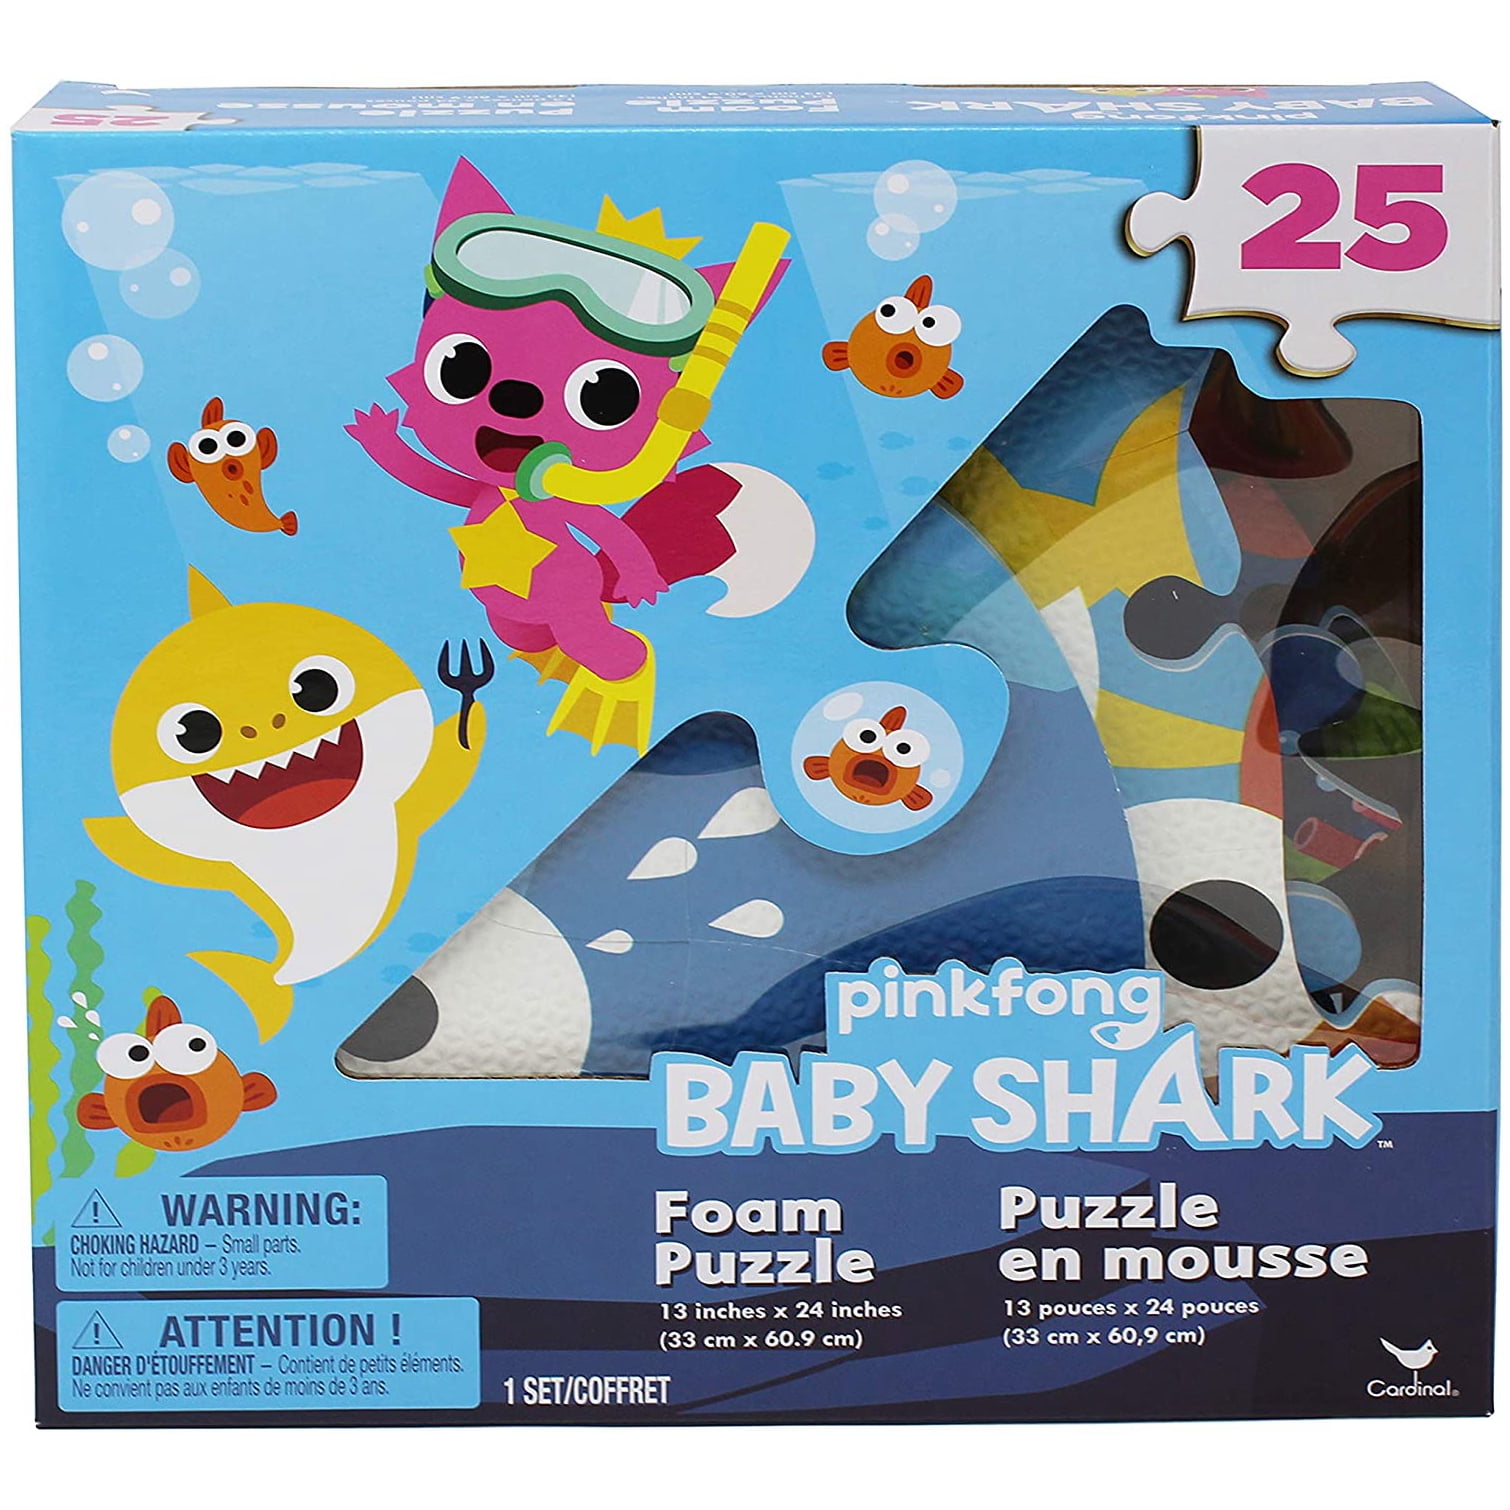 Pinkfong Baby Shark Floor Puzzle 24 Picecs Toddler Nusery Kids Fun Play Game for sale online 